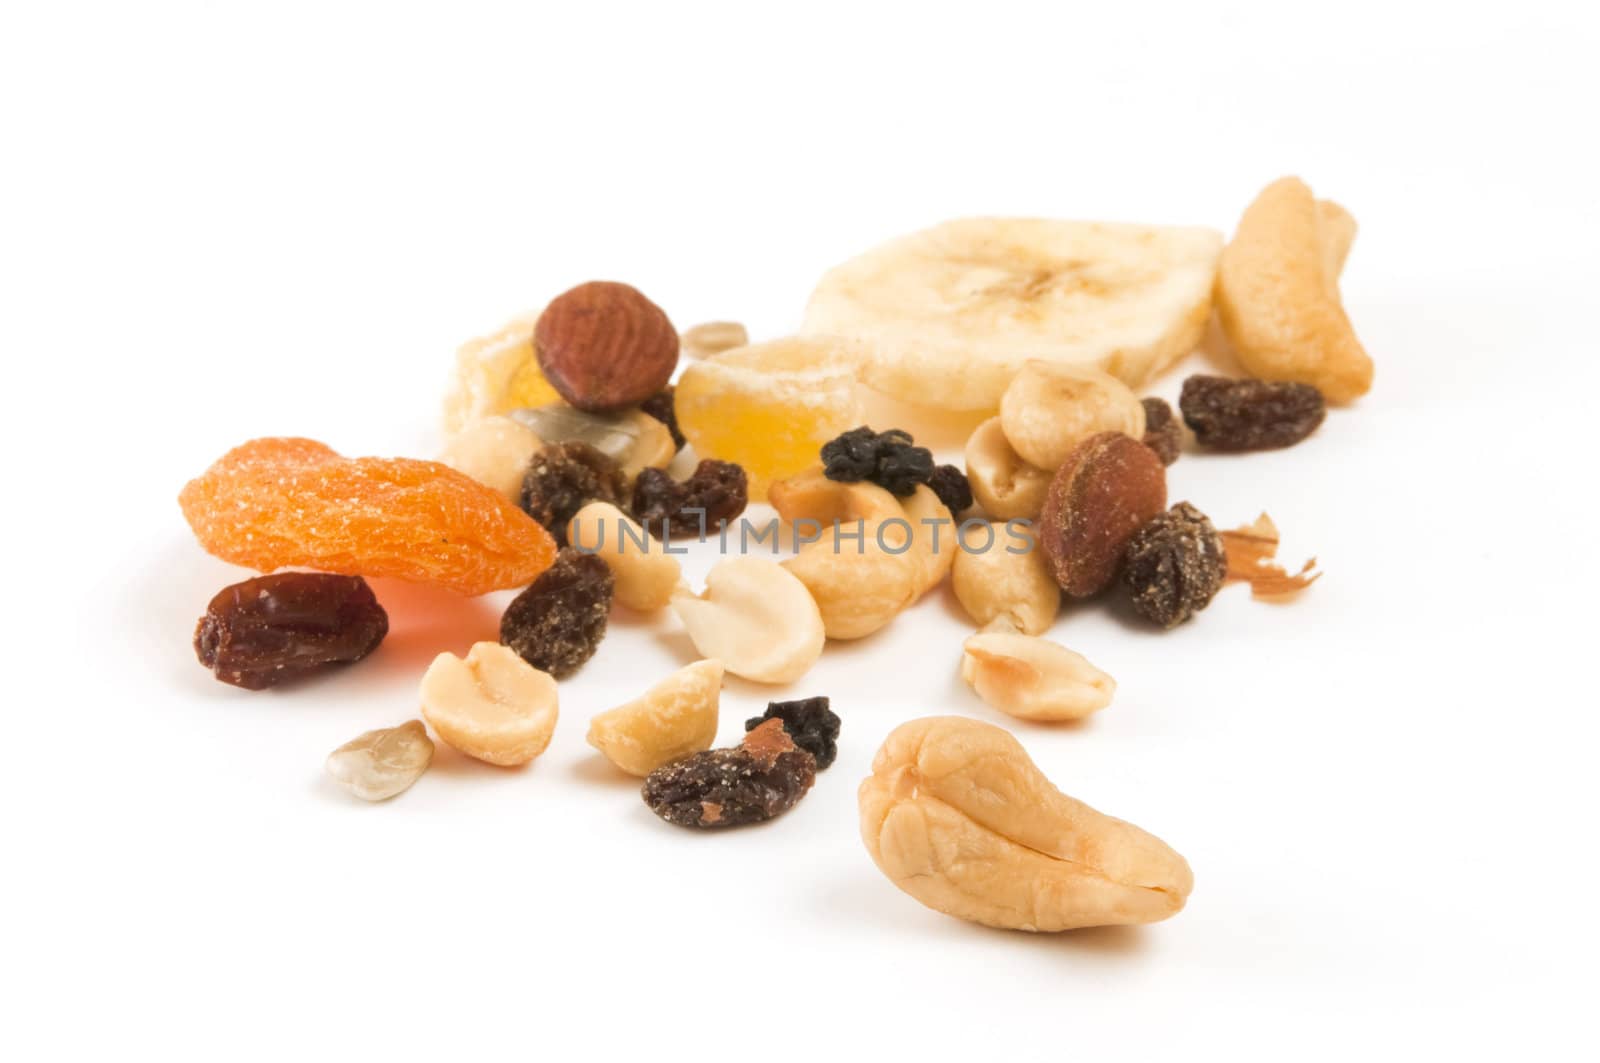 Small amount of trail mix on white background with selective focus on the cashew nut in the foreground